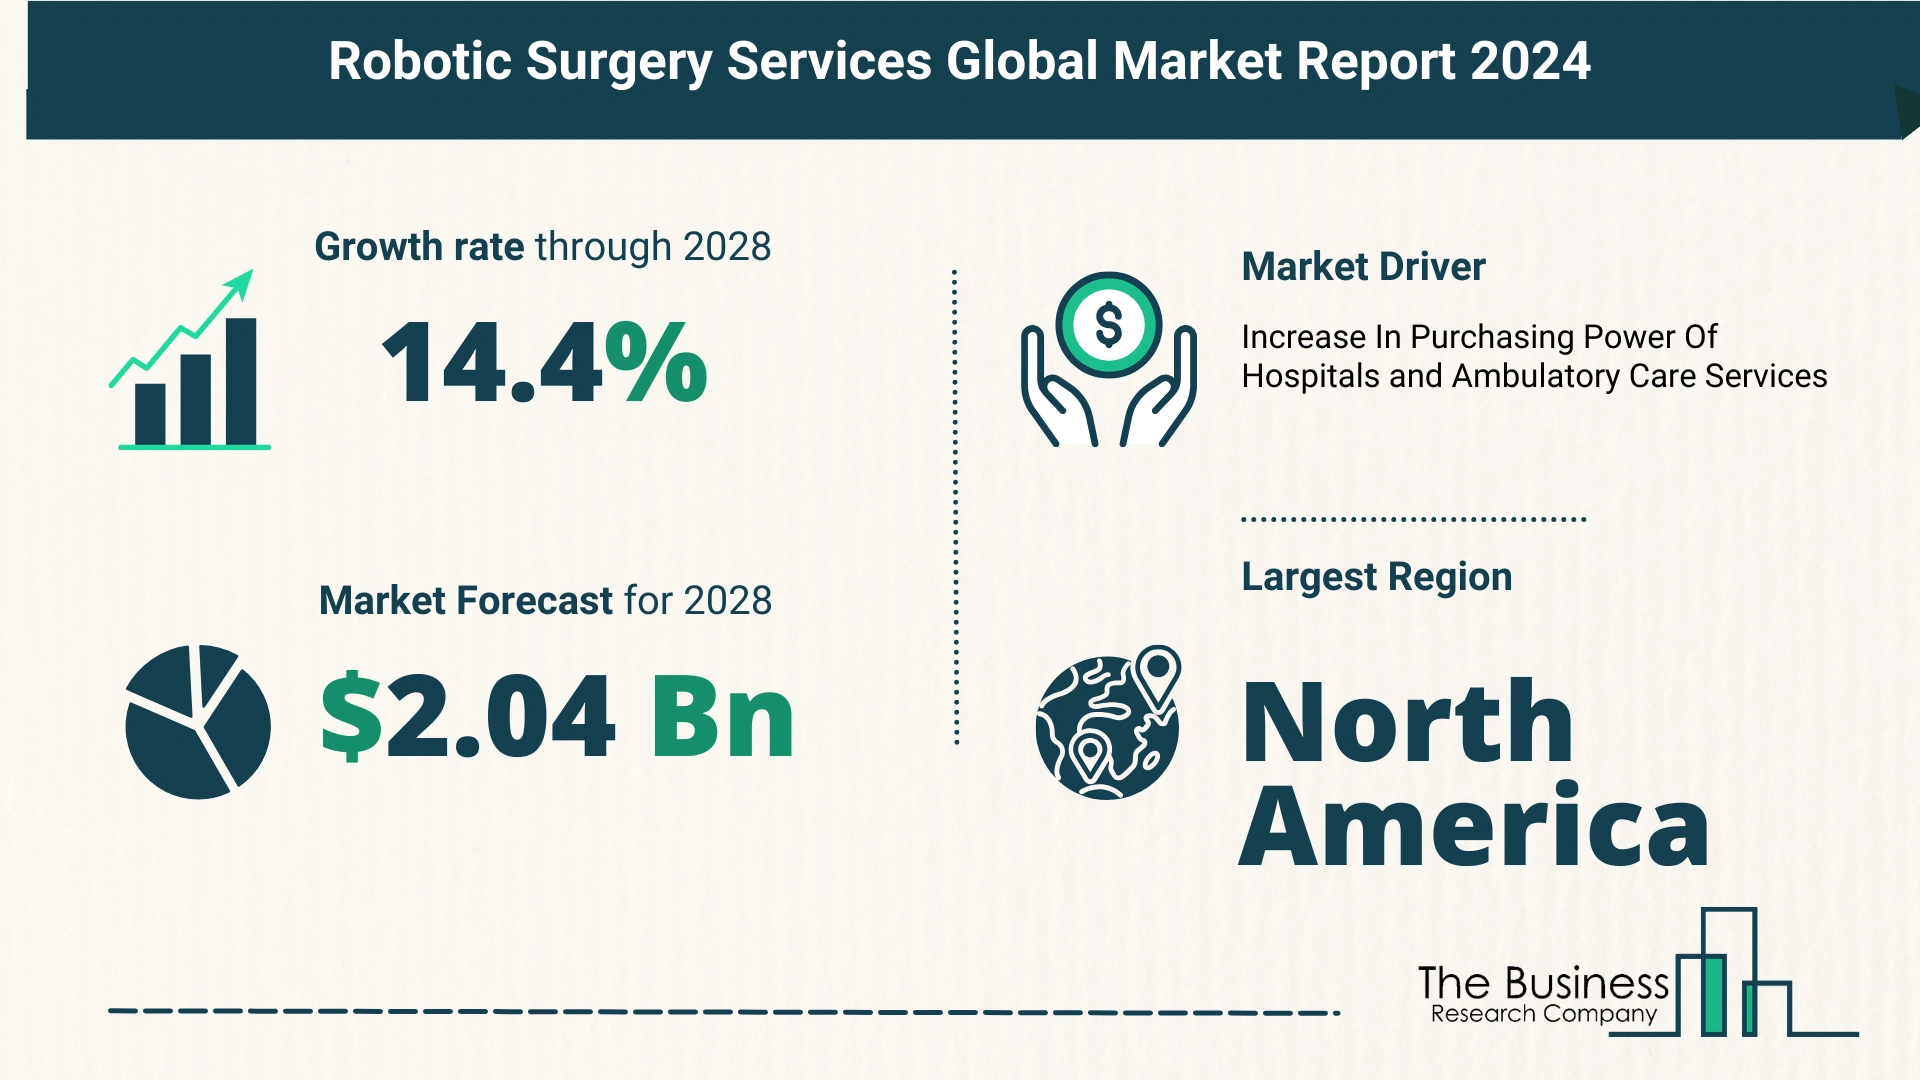 Robotic Surgery Services Market Forecast Until 2033 – Estimated Market Size And Growth Rate